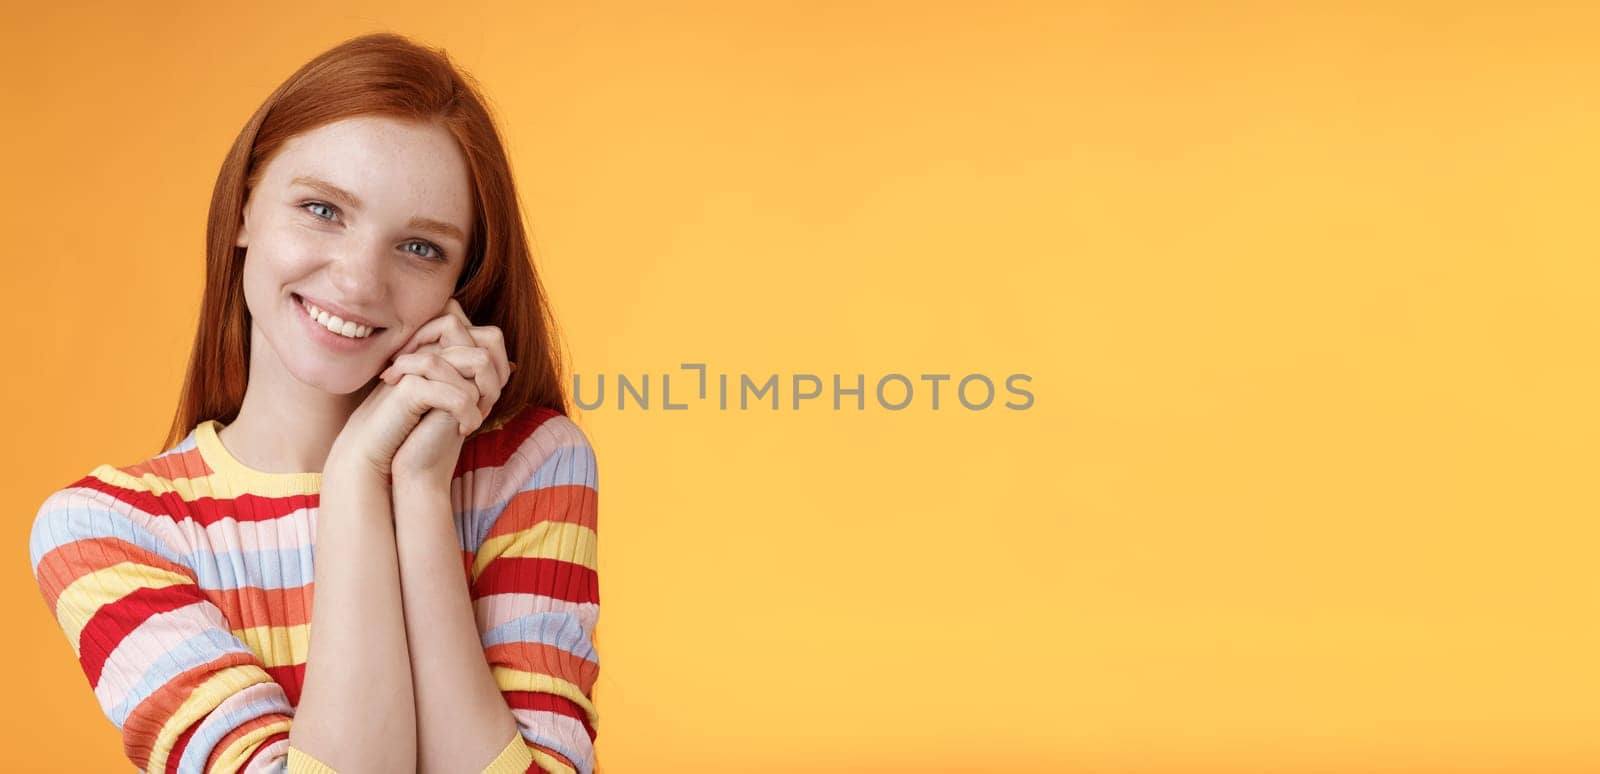 Romantic tender sensual attractive smiling redhead girlfriend melting heart feel warmth delighted lean palms grinning happily sweet gentle gift standing pleased orange background rejoicing thankful.